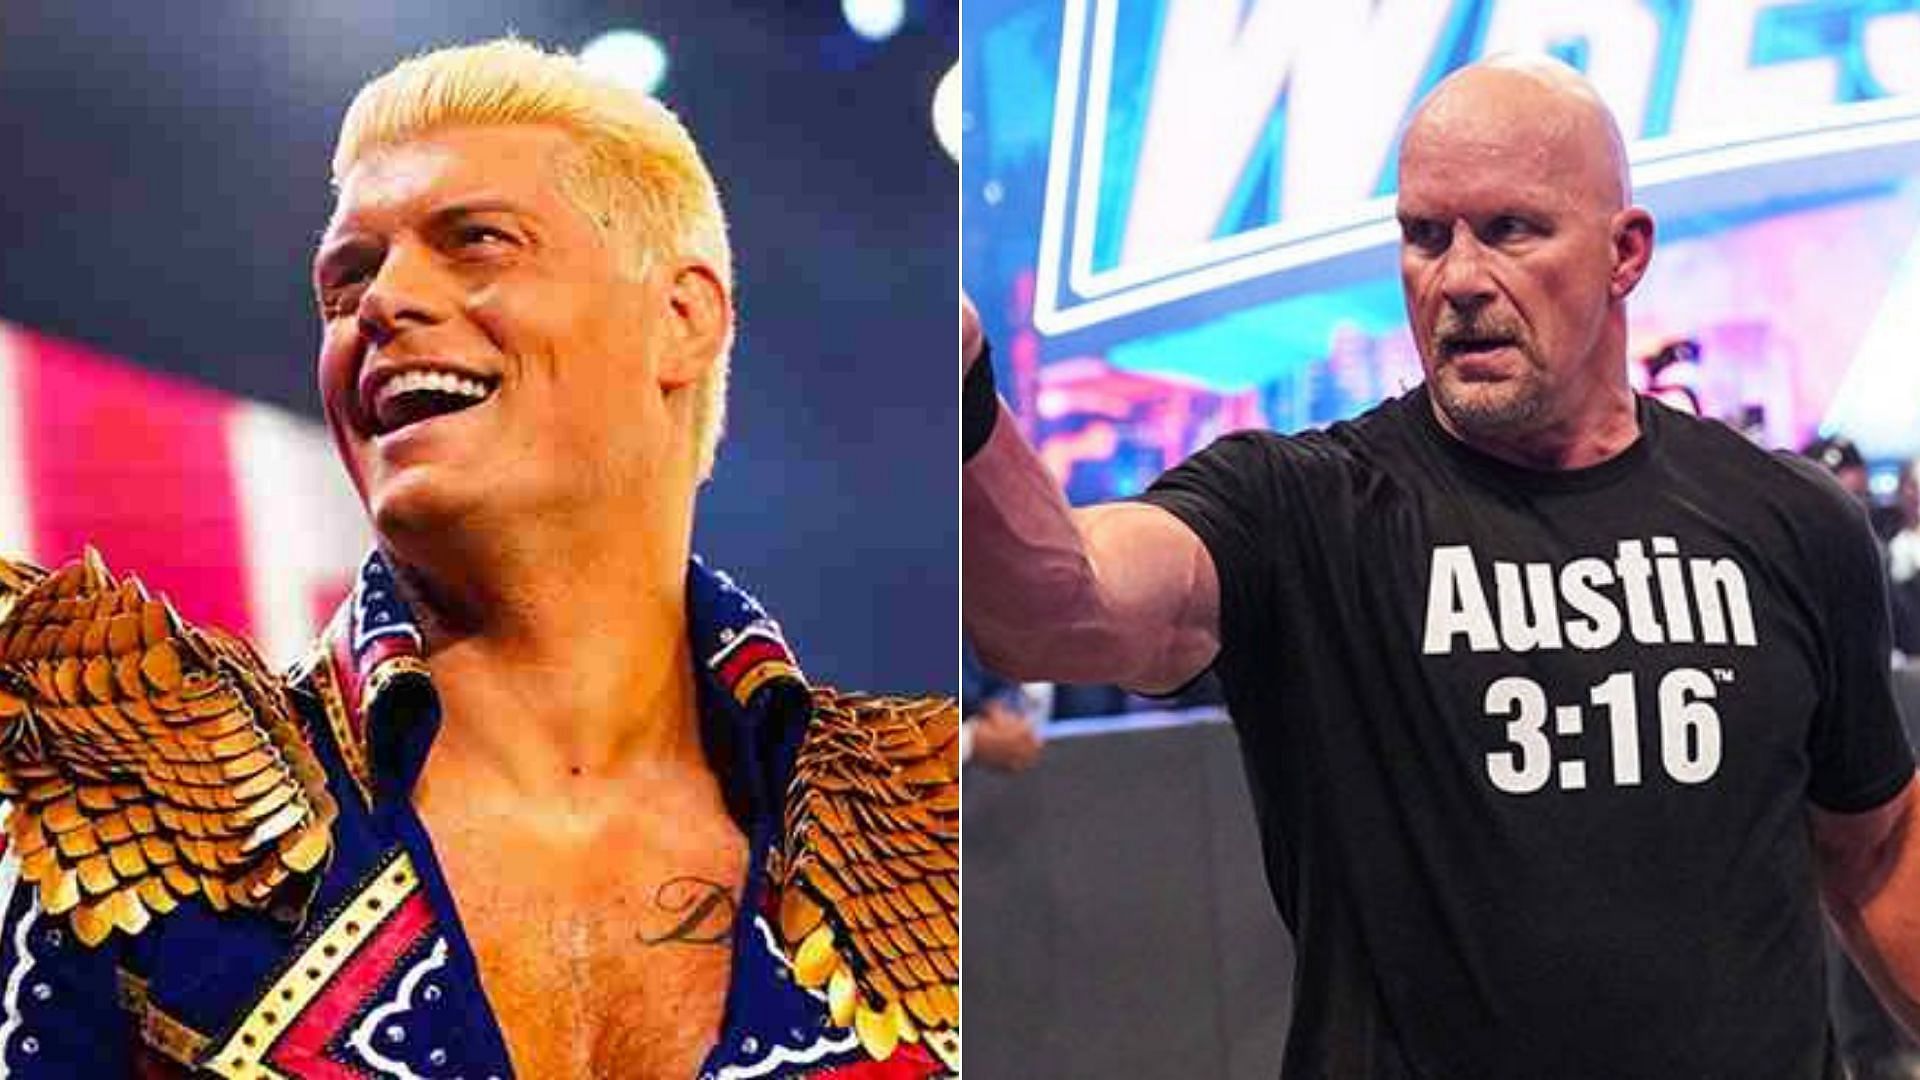 &#039;Stone Cold&#039; Steve Austin had some wise words for Cody Rhodes.